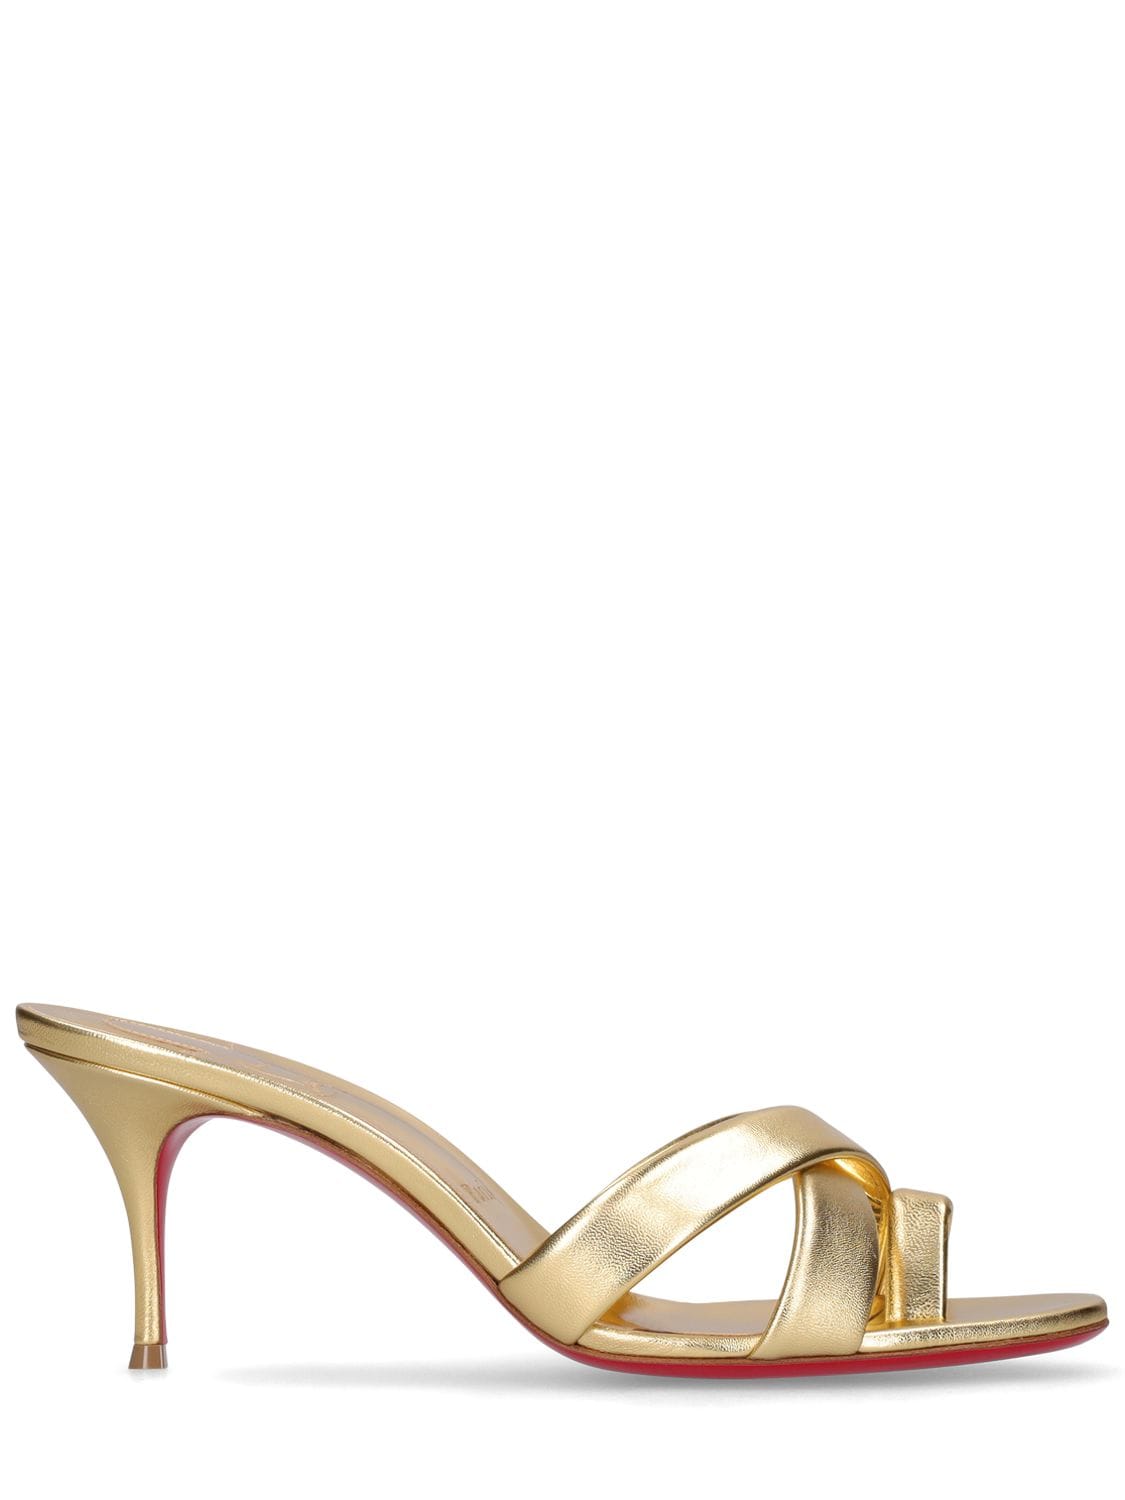 CHRISTIAN LOUBOUTIN 70mm Simply Me Metallic Leather Sandals